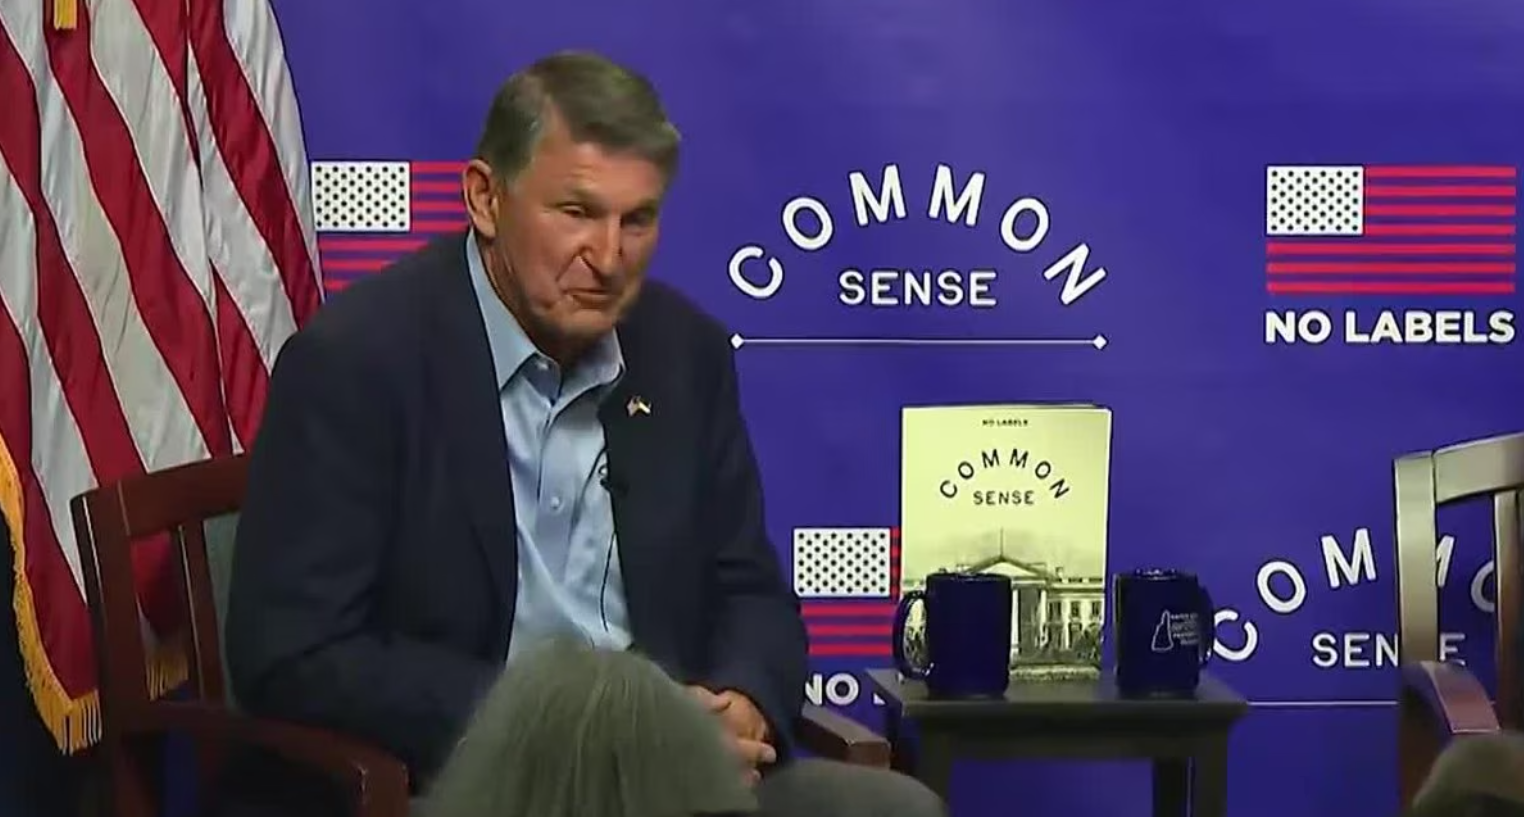 senator joe manchin speaking at a town hall in New Hampshire hosted by the interest group No Labels